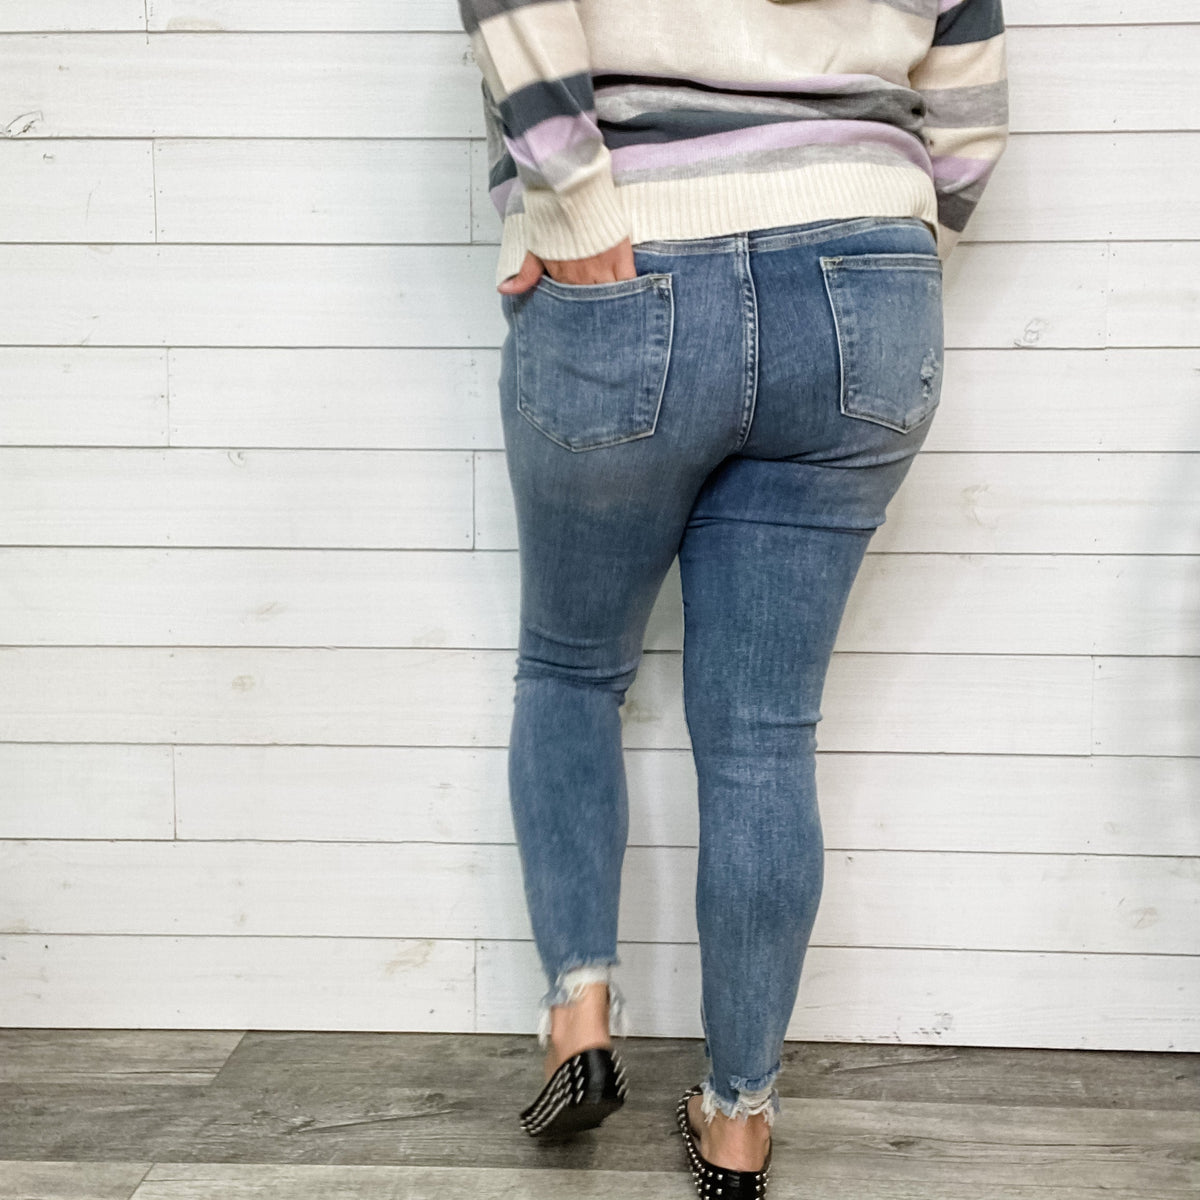 Judy Blue "And then some" Skinny Jeans-Lola Monroe Boutique